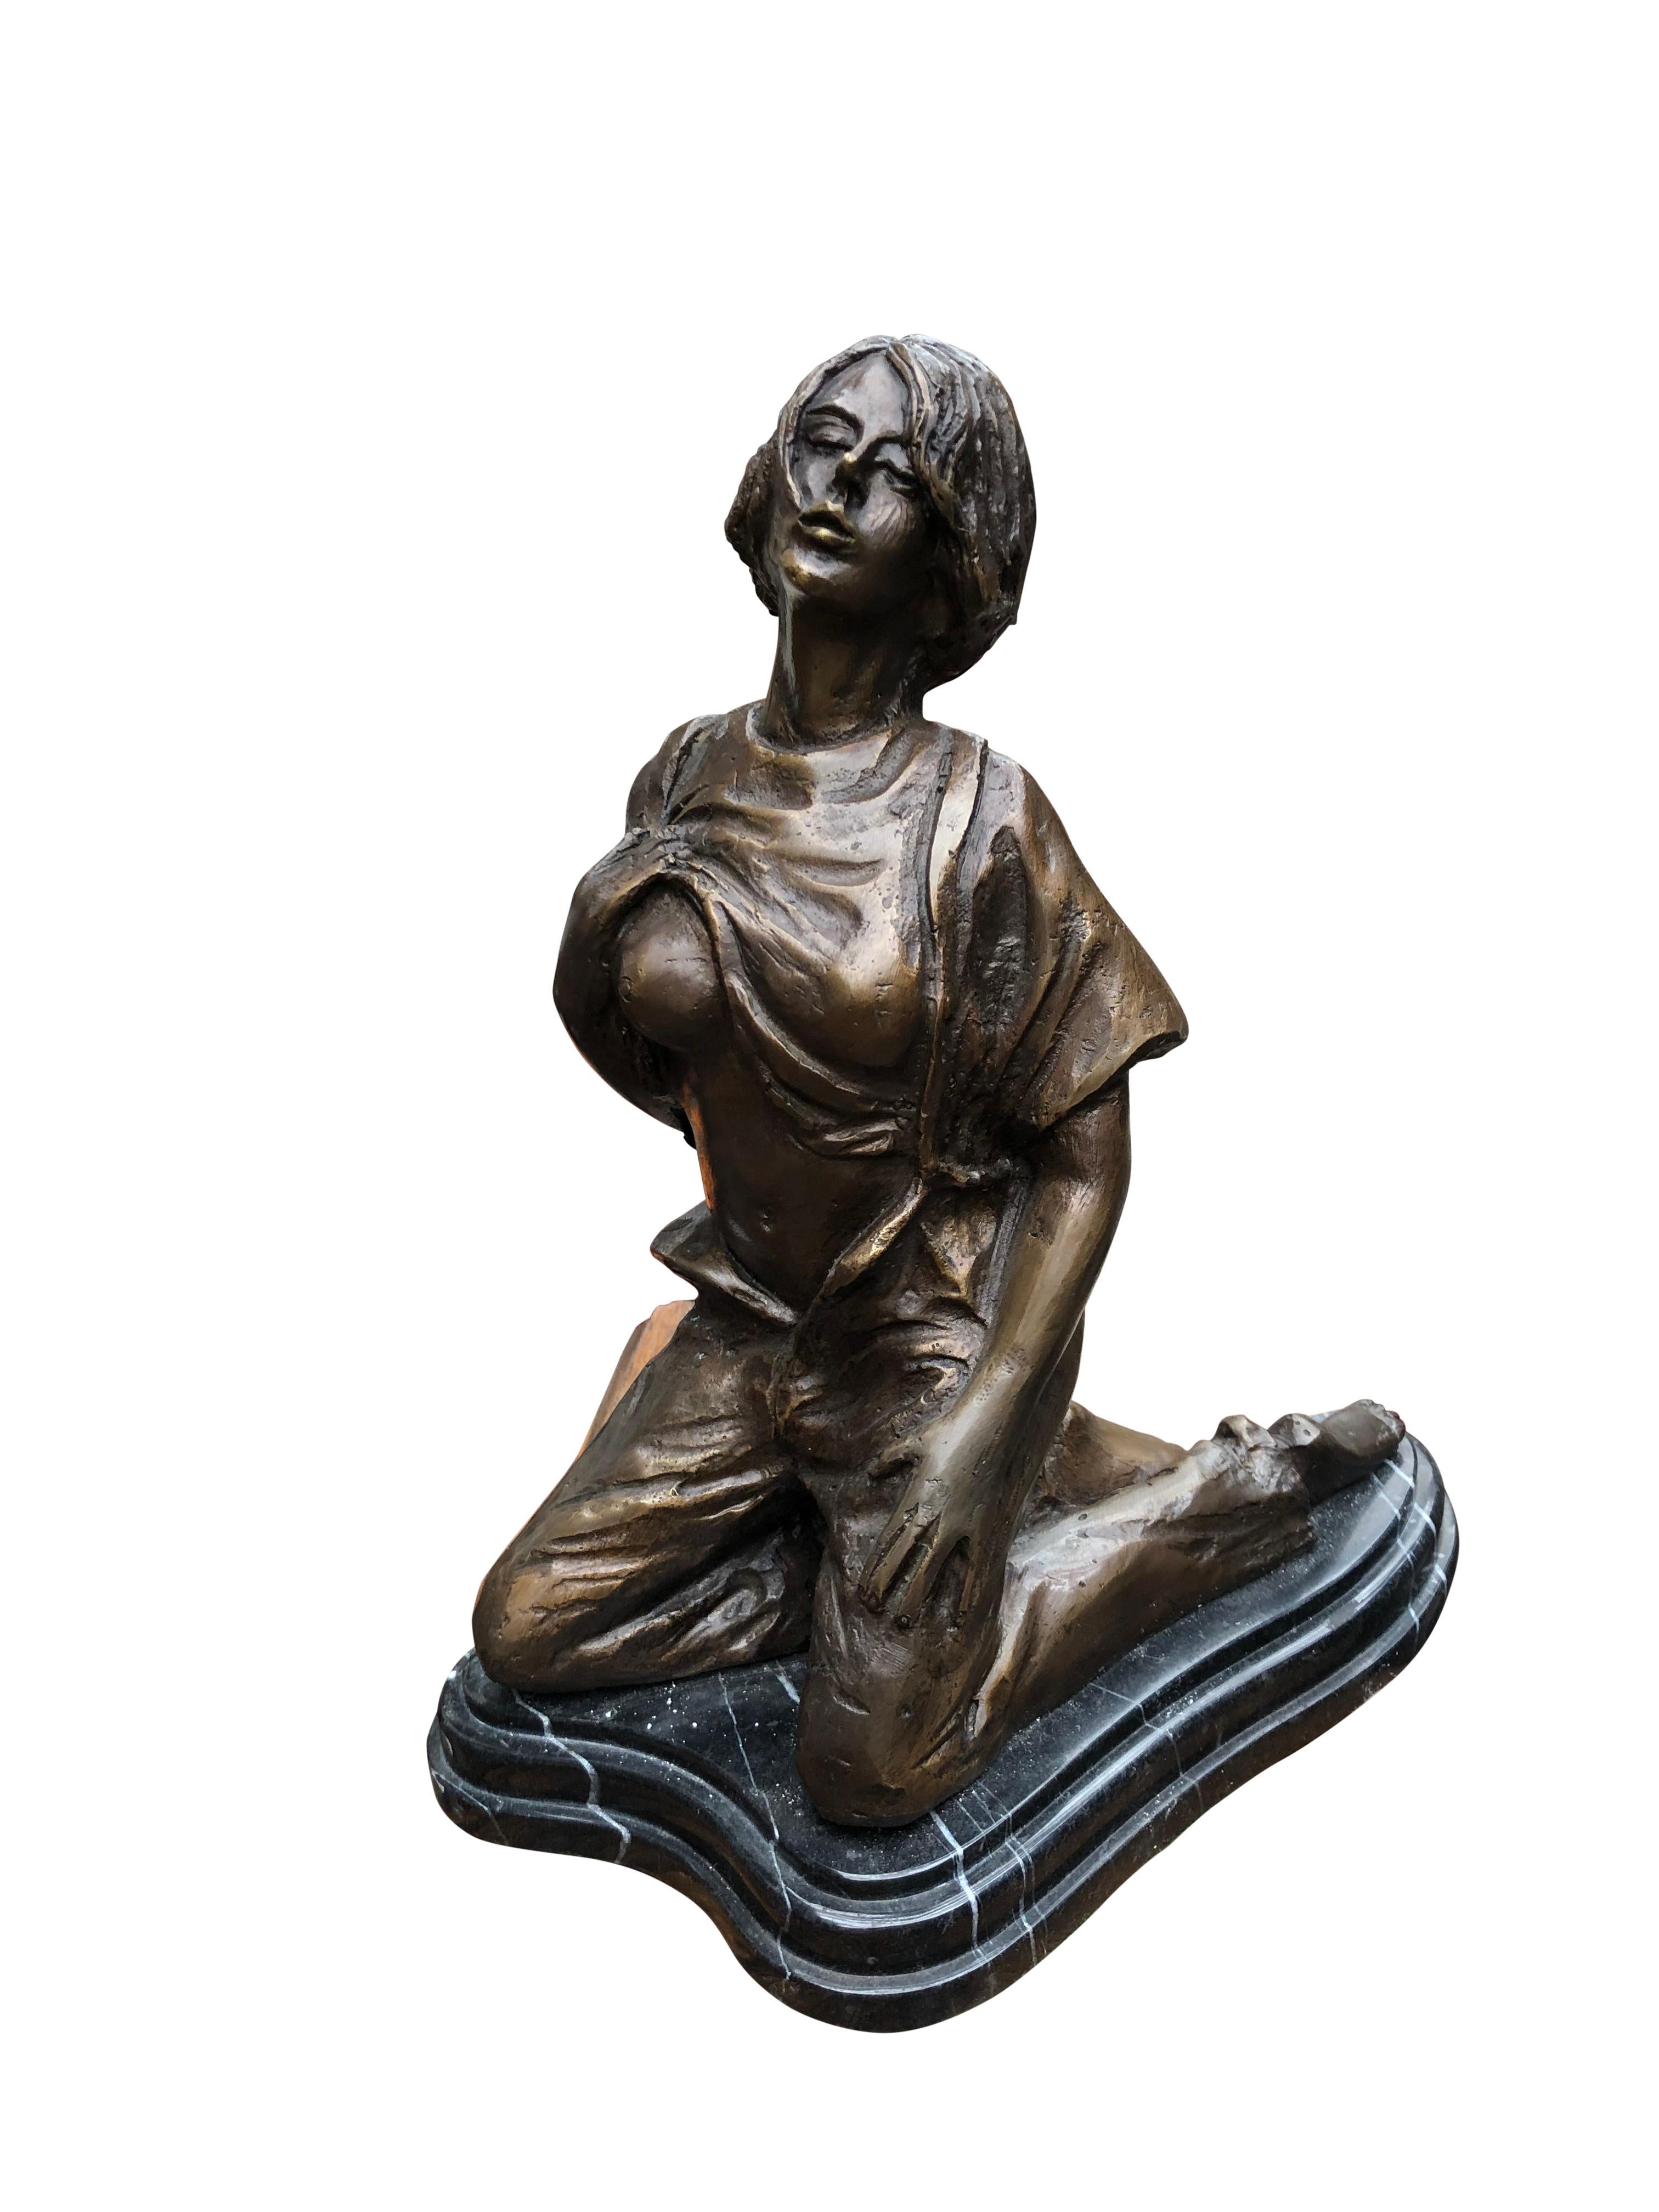 A gorgeous French bronze showing a semi-nude female figurine, 20th century. Wonderful piece of erotic art. Great collectors piece and stands on the black marble base smooth. Offered in Excellent shape.